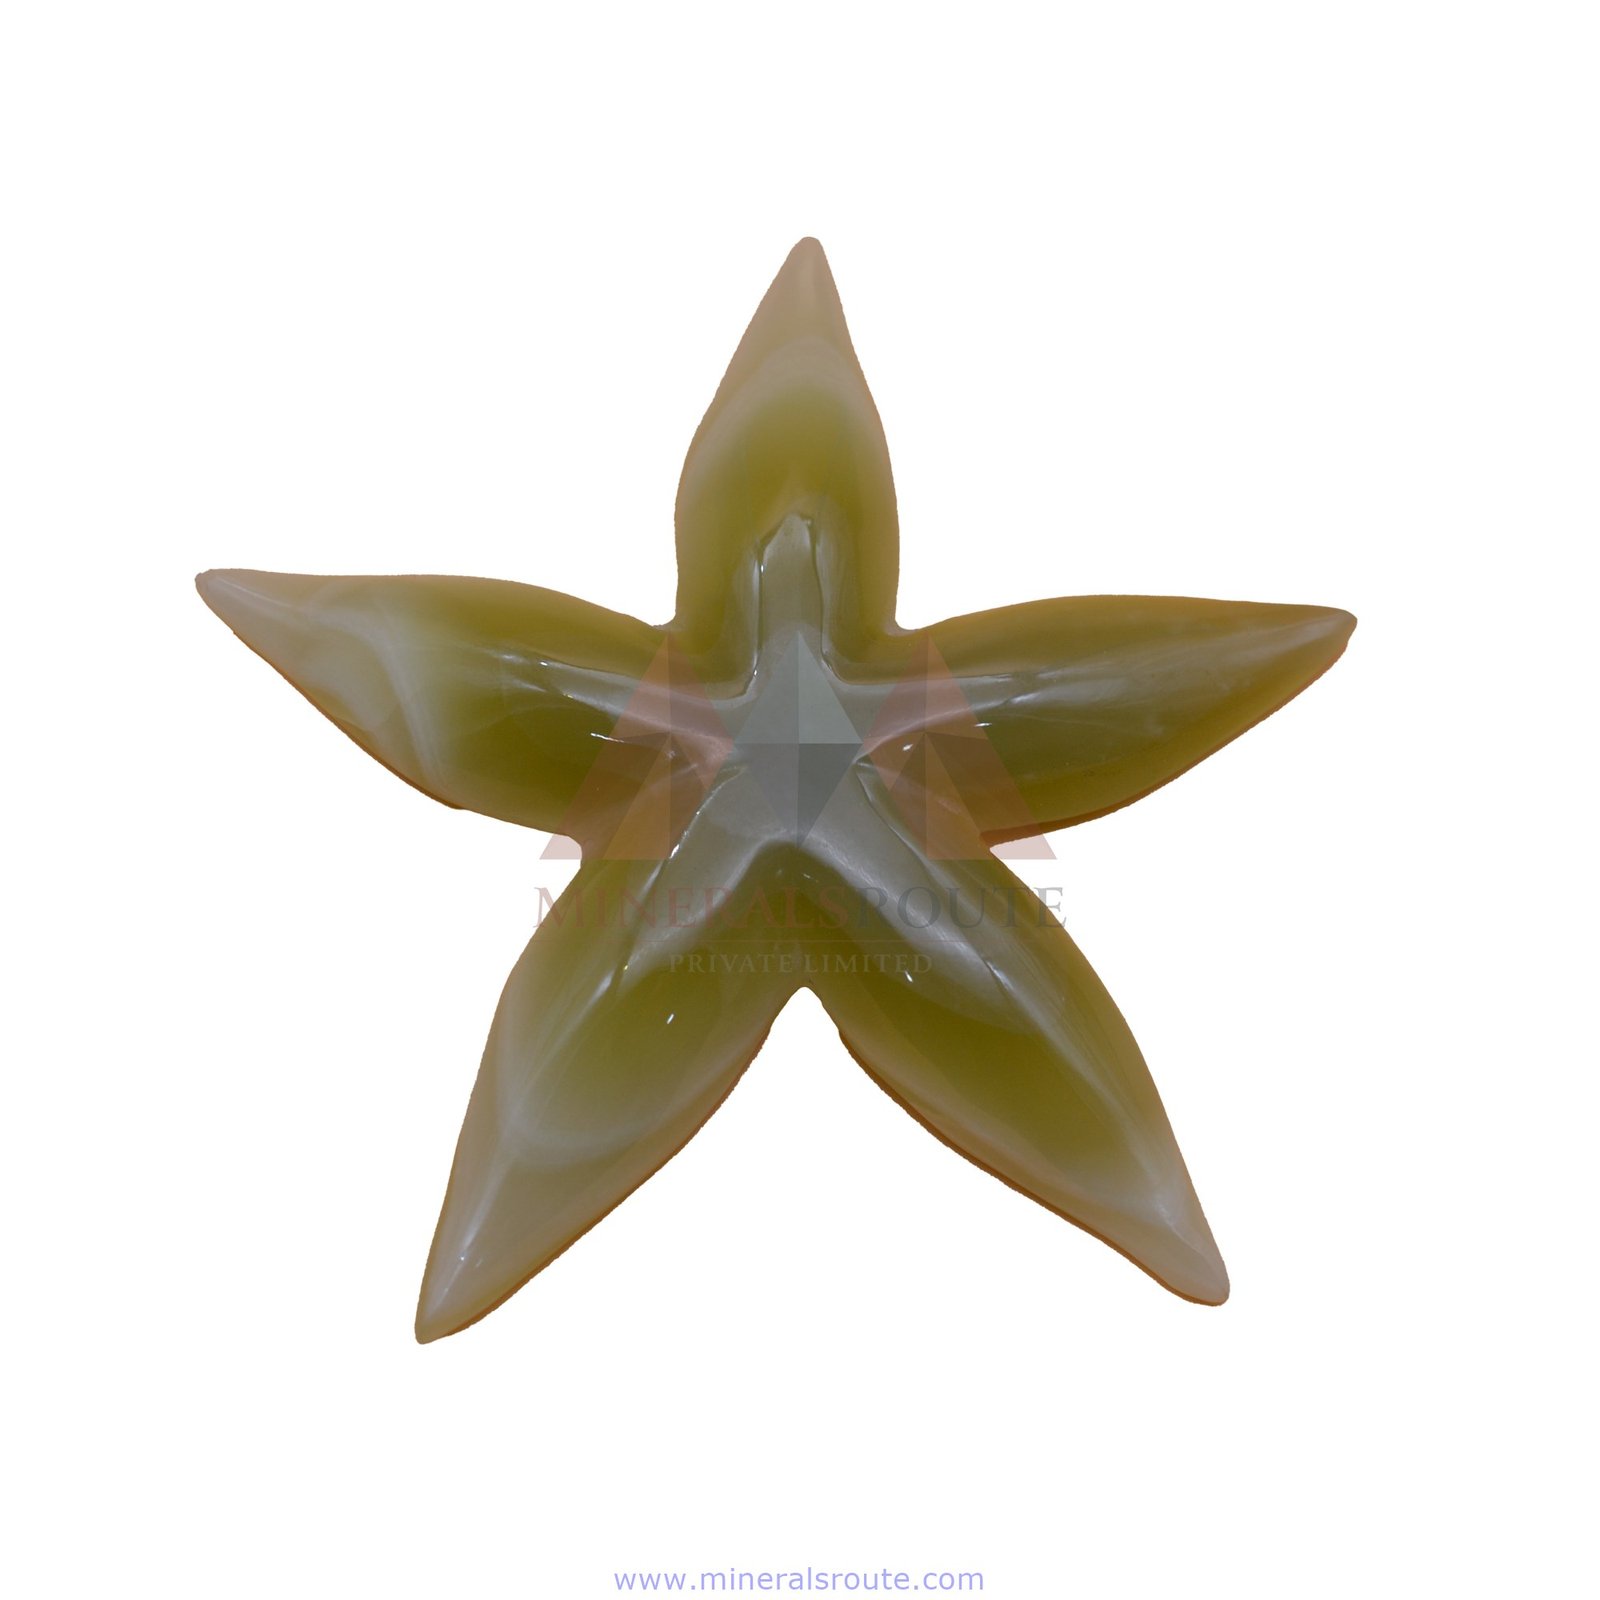 Star Fish Paper Weight